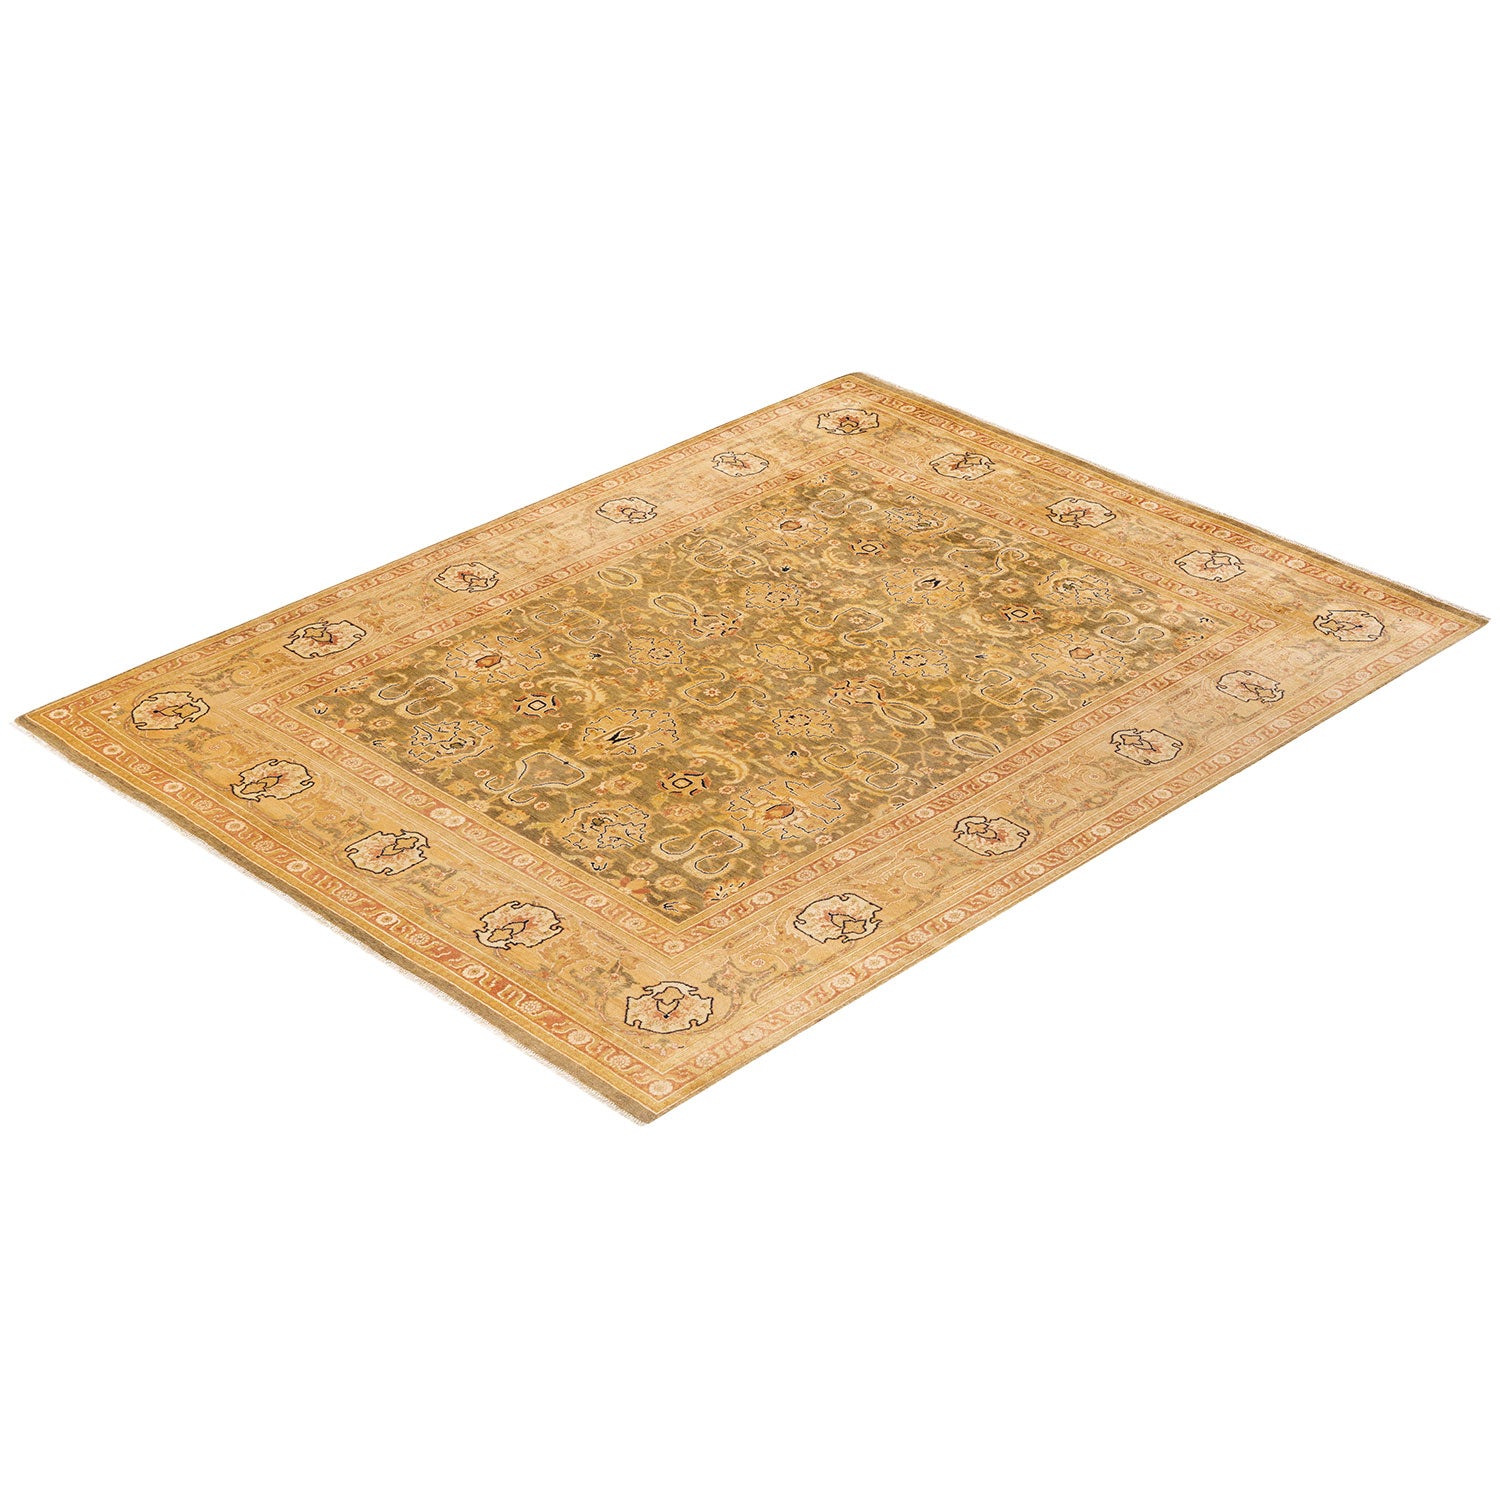 An intricate rectangular area rug with a refined traditional design.